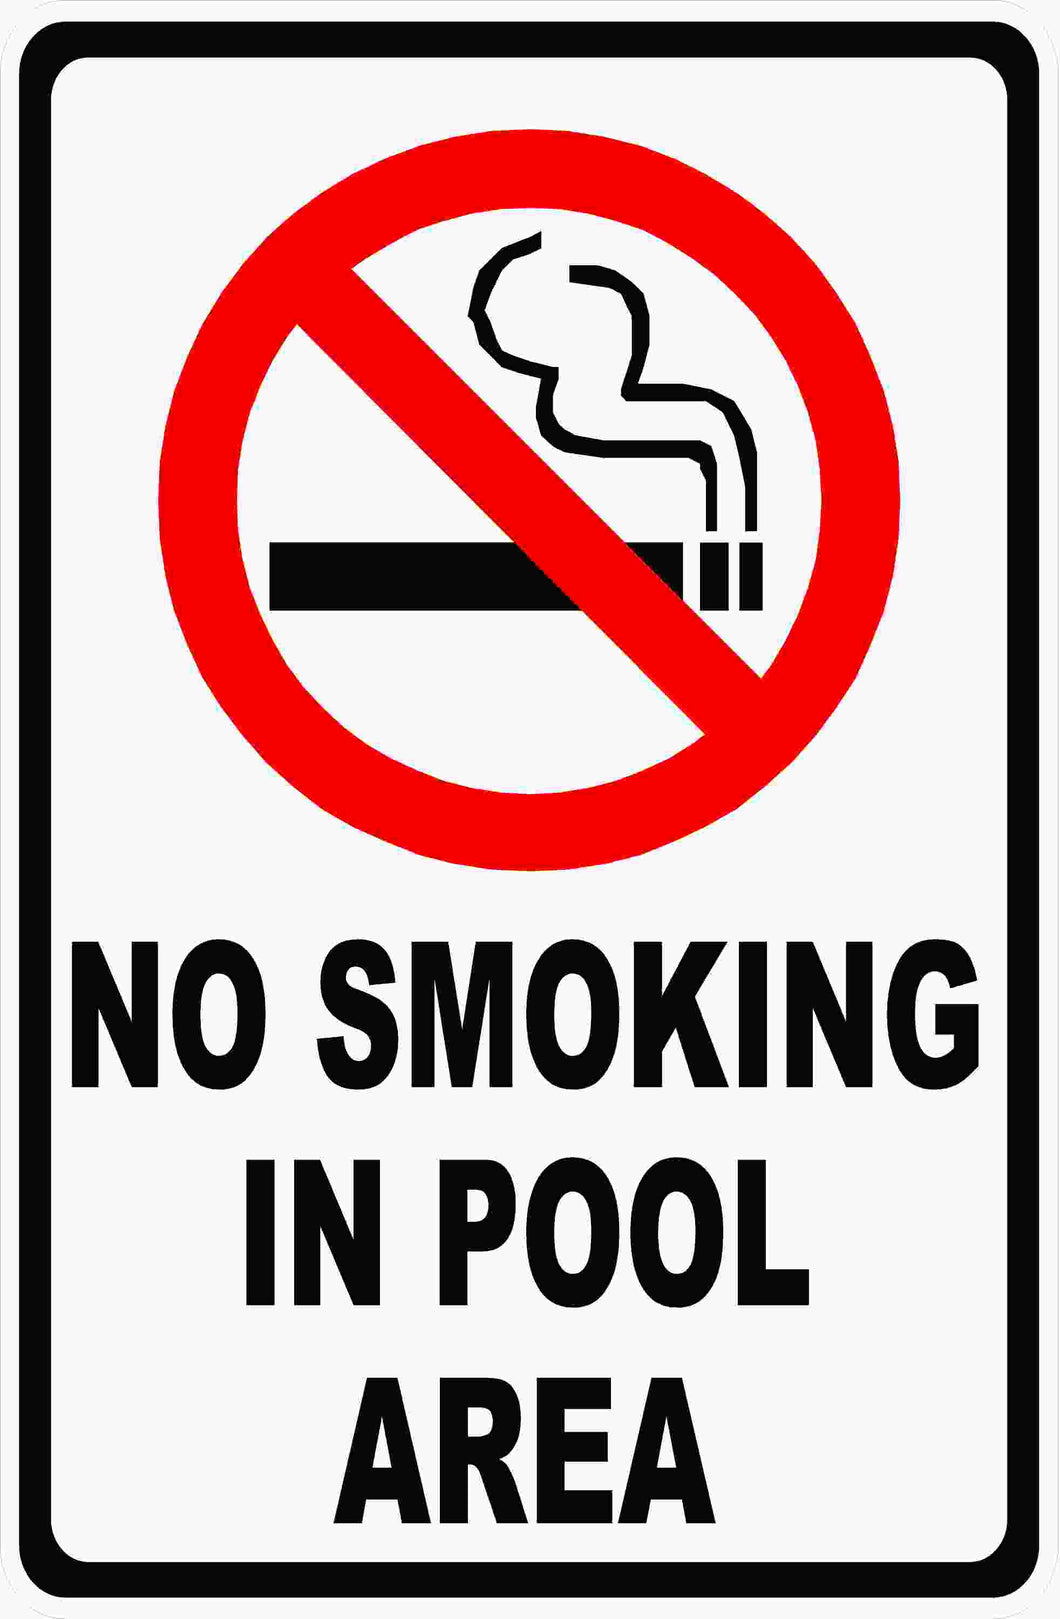 No Smoking in Pool Area Sign by Sala Graphics